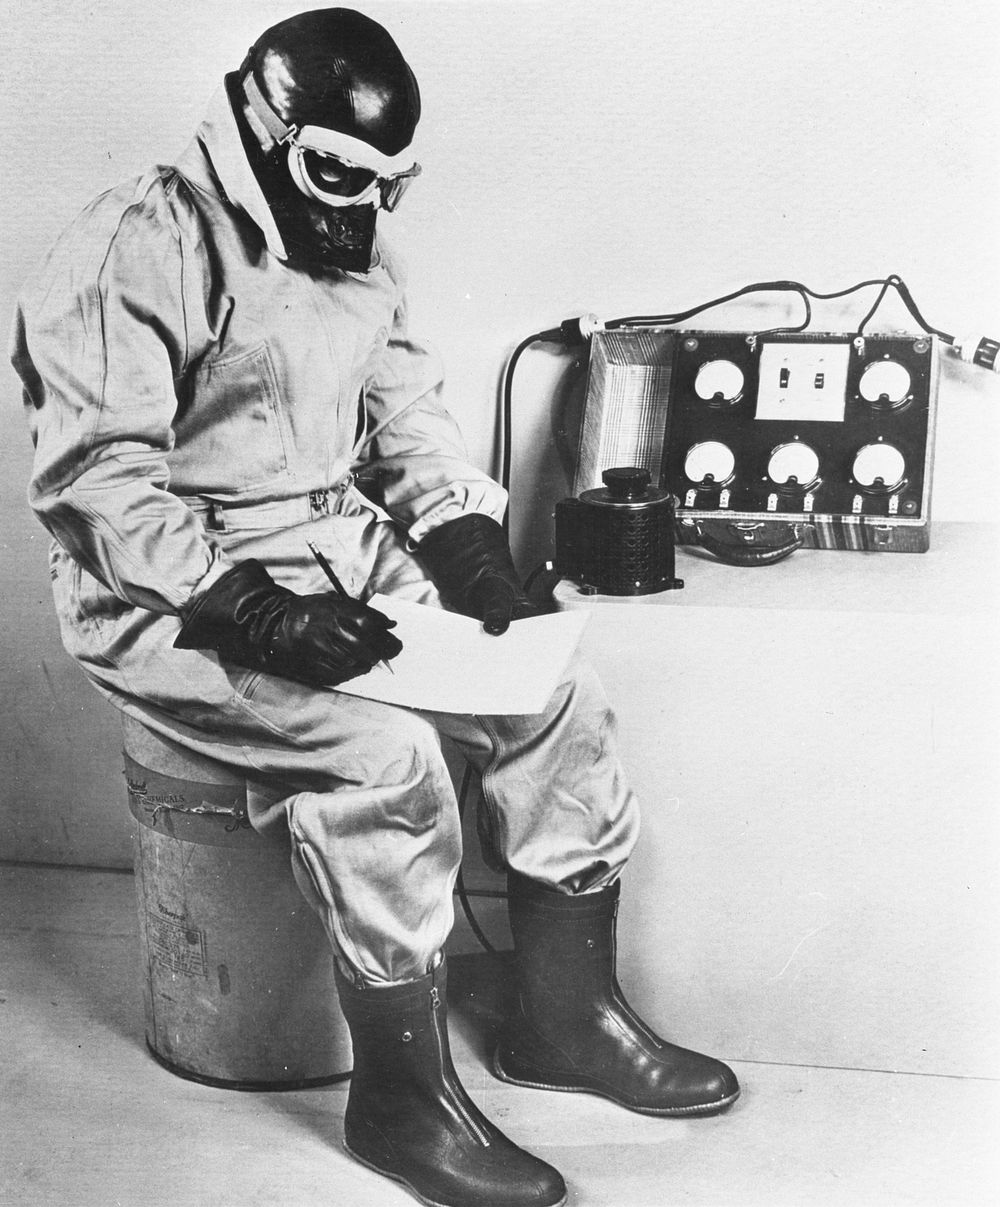 Testing one of 12,000 General Electric electrically heated flying suits being made for the U.S. Air Corps, at sixty-three…